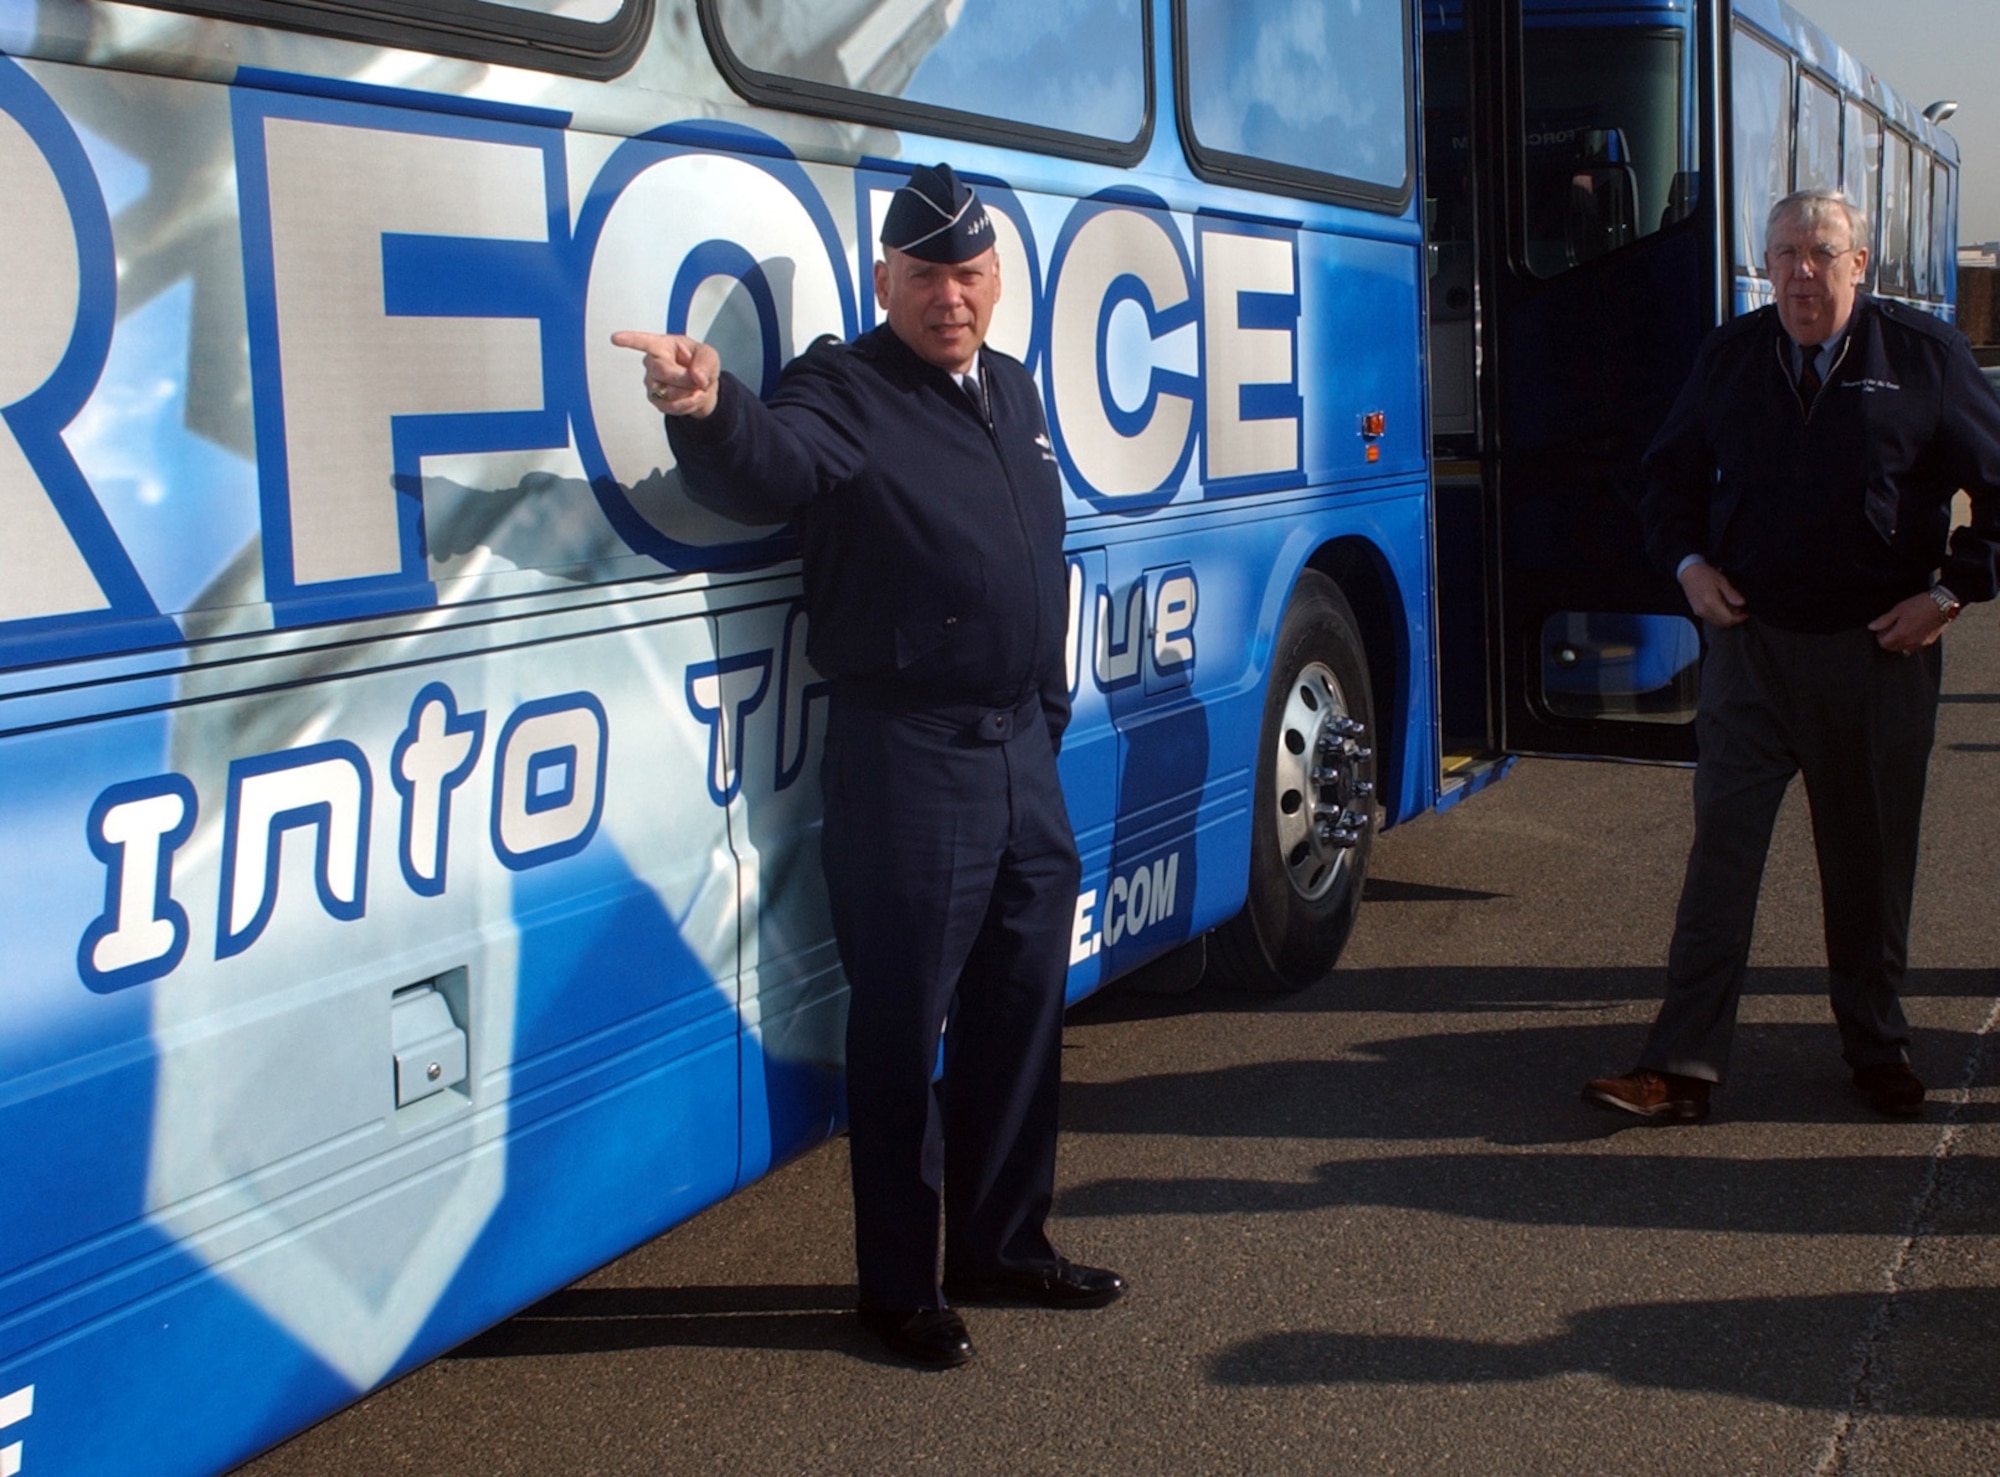 WASHINGTON -- Air Force Chief of Staff Gen. John P. Jumper and Secretary of the Air Force Dr. James G. Roche inspect the new bus design scheme at the Pentagon on Feb. 19.  The new graphic design on the buses reflects the mission of the Air Force and demonstrates the diversity of careers in today's Air Force.  There are a total of 10 buses in this test program.  Four will operate from Bolling Air Force Base, D.C., and the other six will be at Randolph AFB, Texas; the U.S. Air Force Academy, Colo.; and Nellis AFB, Nev.  (U.S. Air Force photo by Master Sgt. Gary R. Coppage)